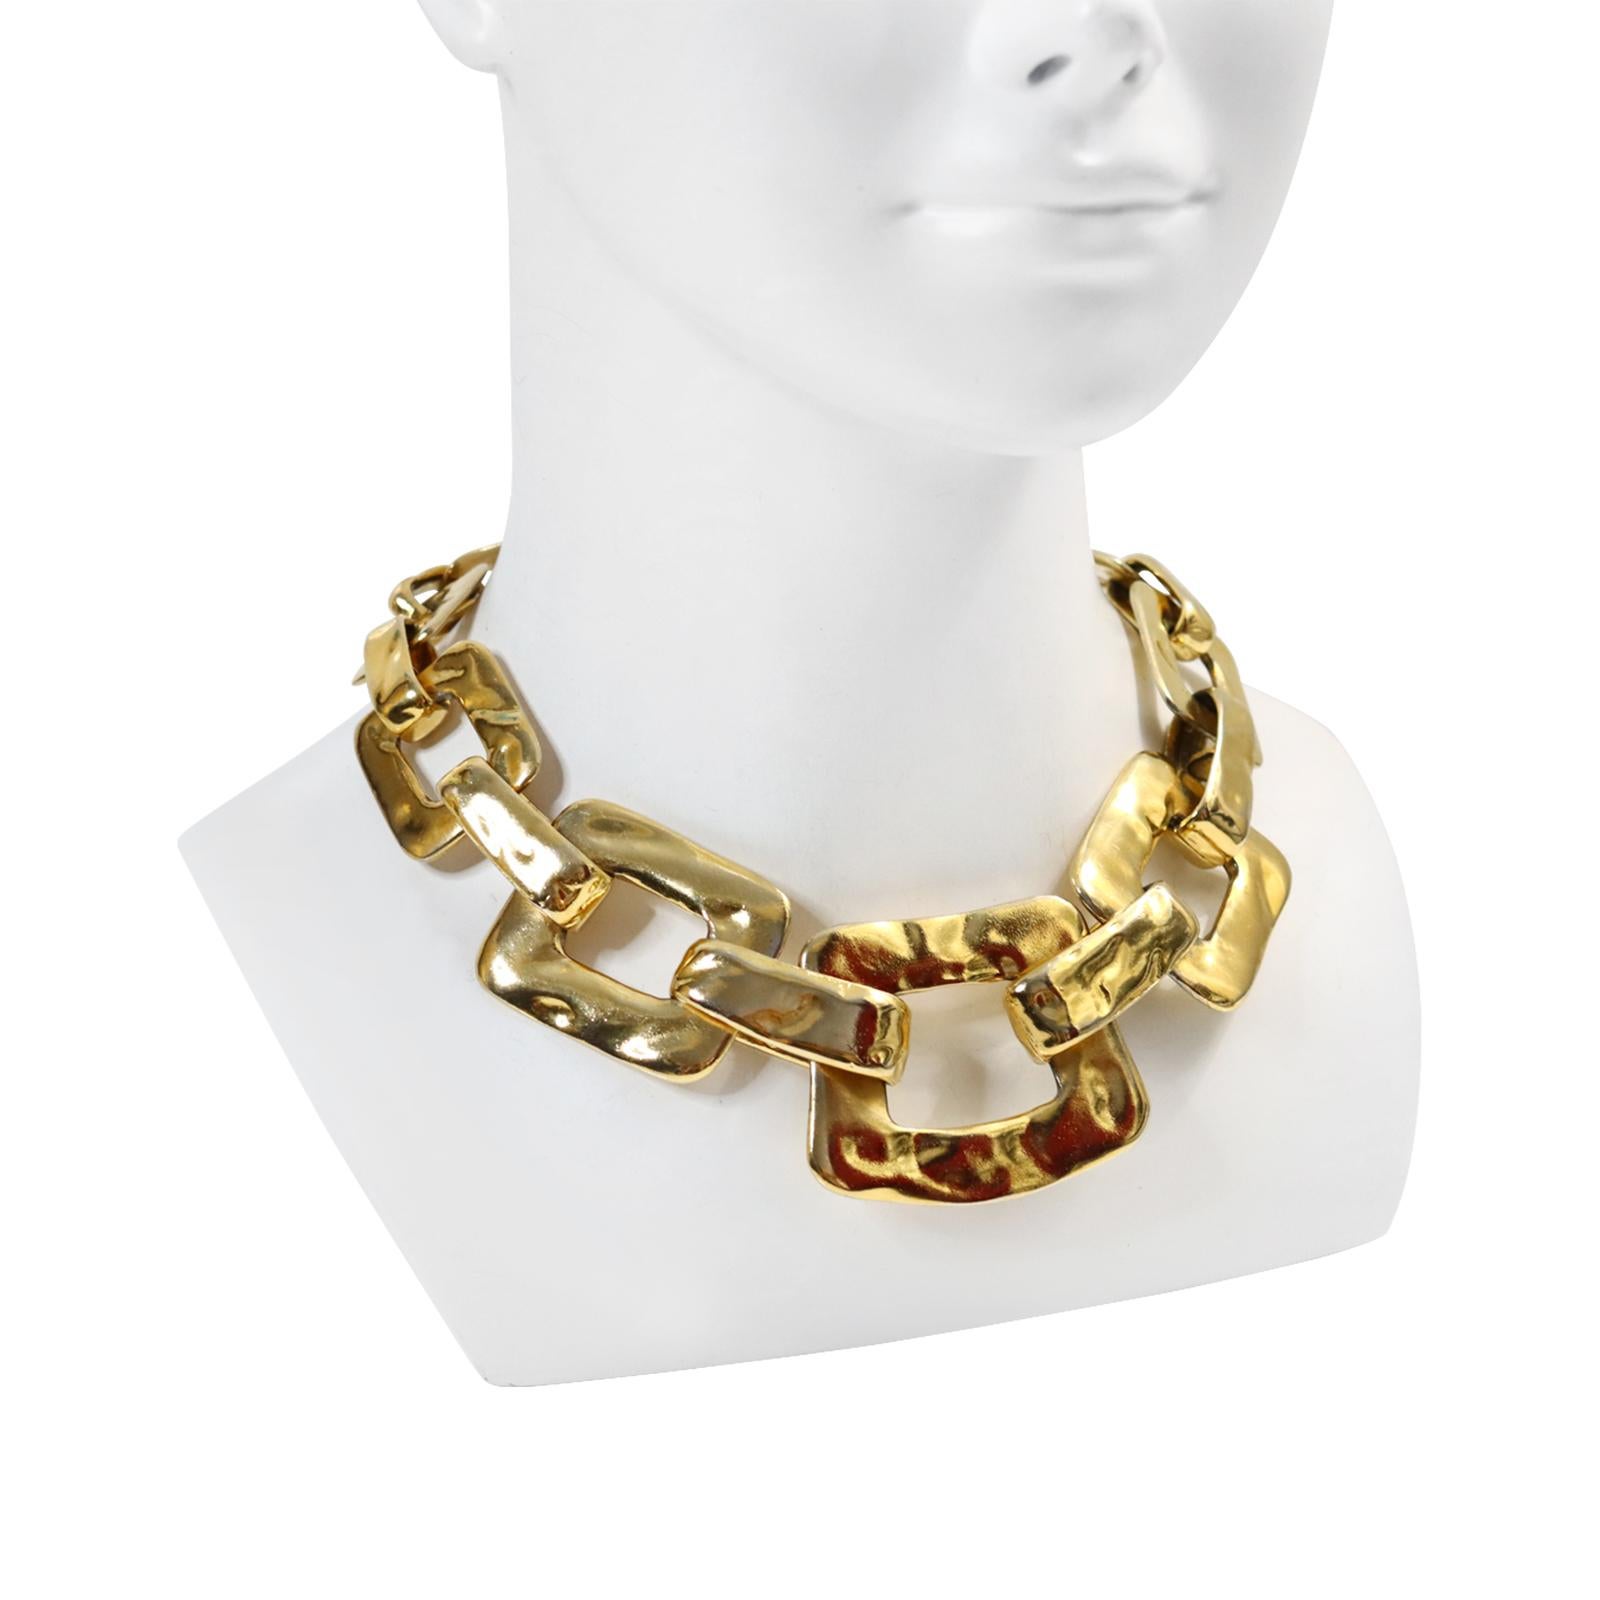 Vintage YSL Gold Tone Heavy Graduated Link Necklace.  Signed and Numbered #319 of #425. Special when on.  I have this set myself.  I have managed over the years to acquire the bracelet and the earrings and the necklace all in three different